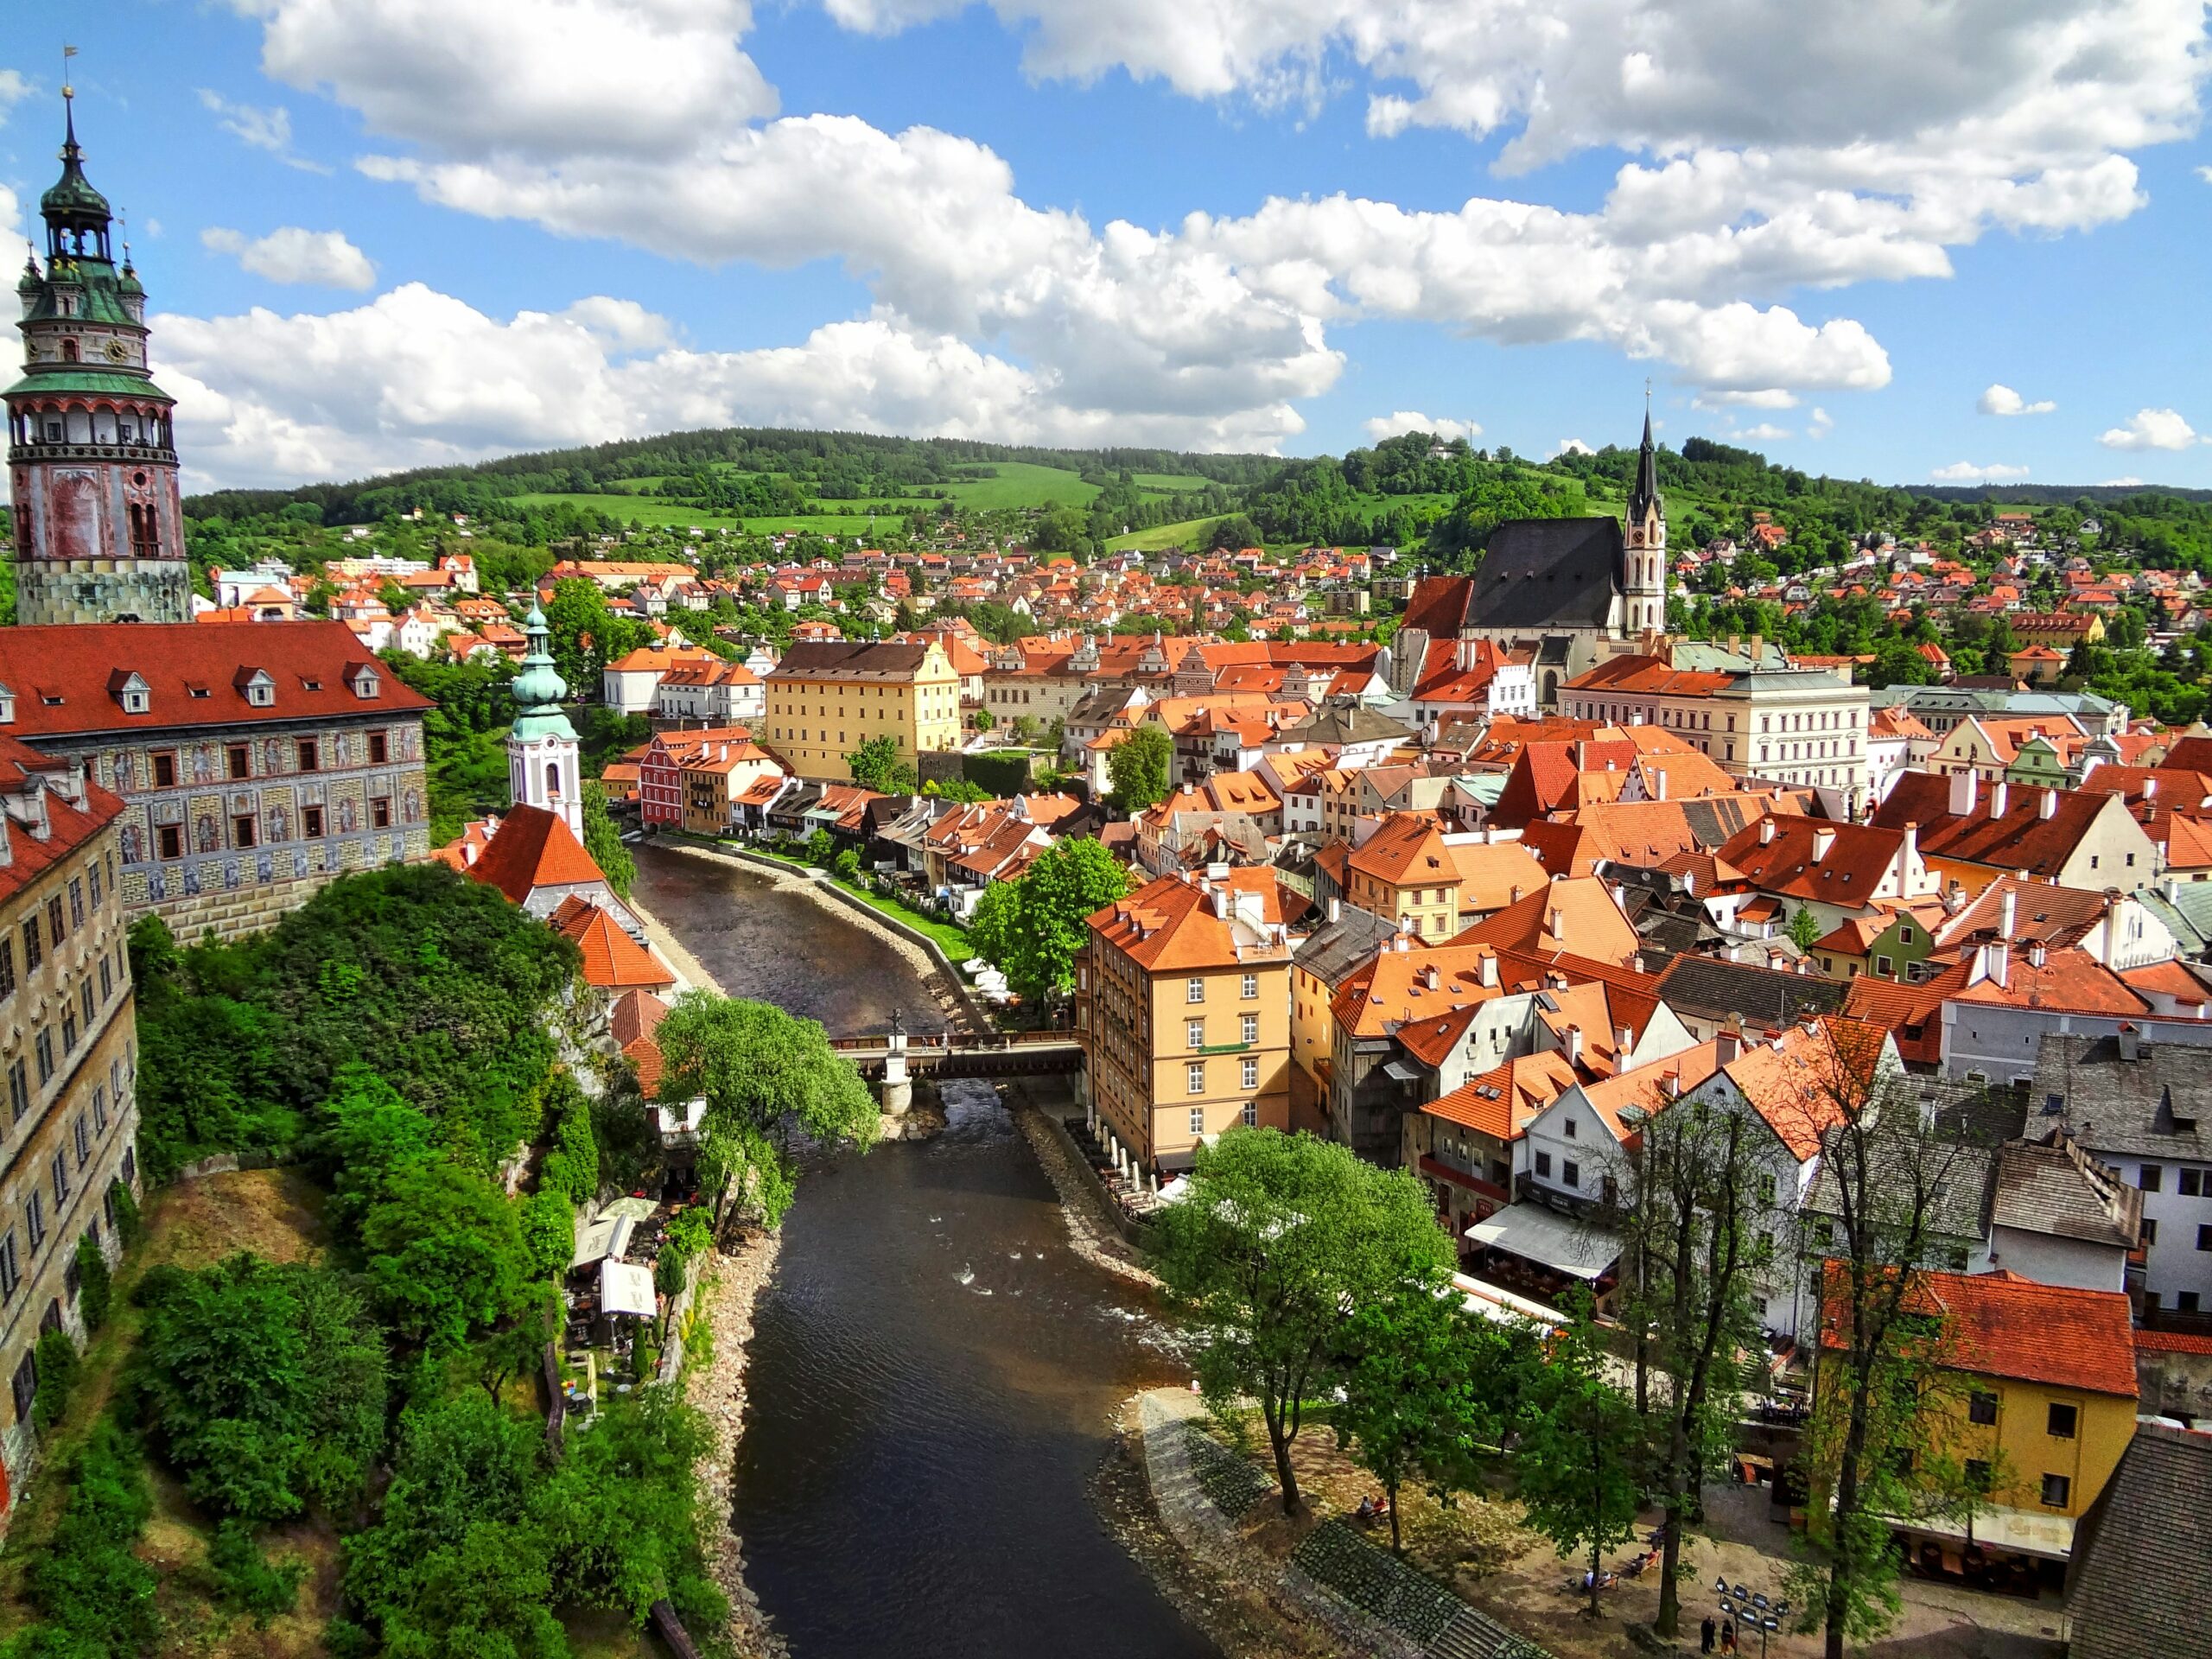 Tourism returns to pre-pandemic levels: Prague and many other destinations offer a great potential for tourism growth in the Czech Republic